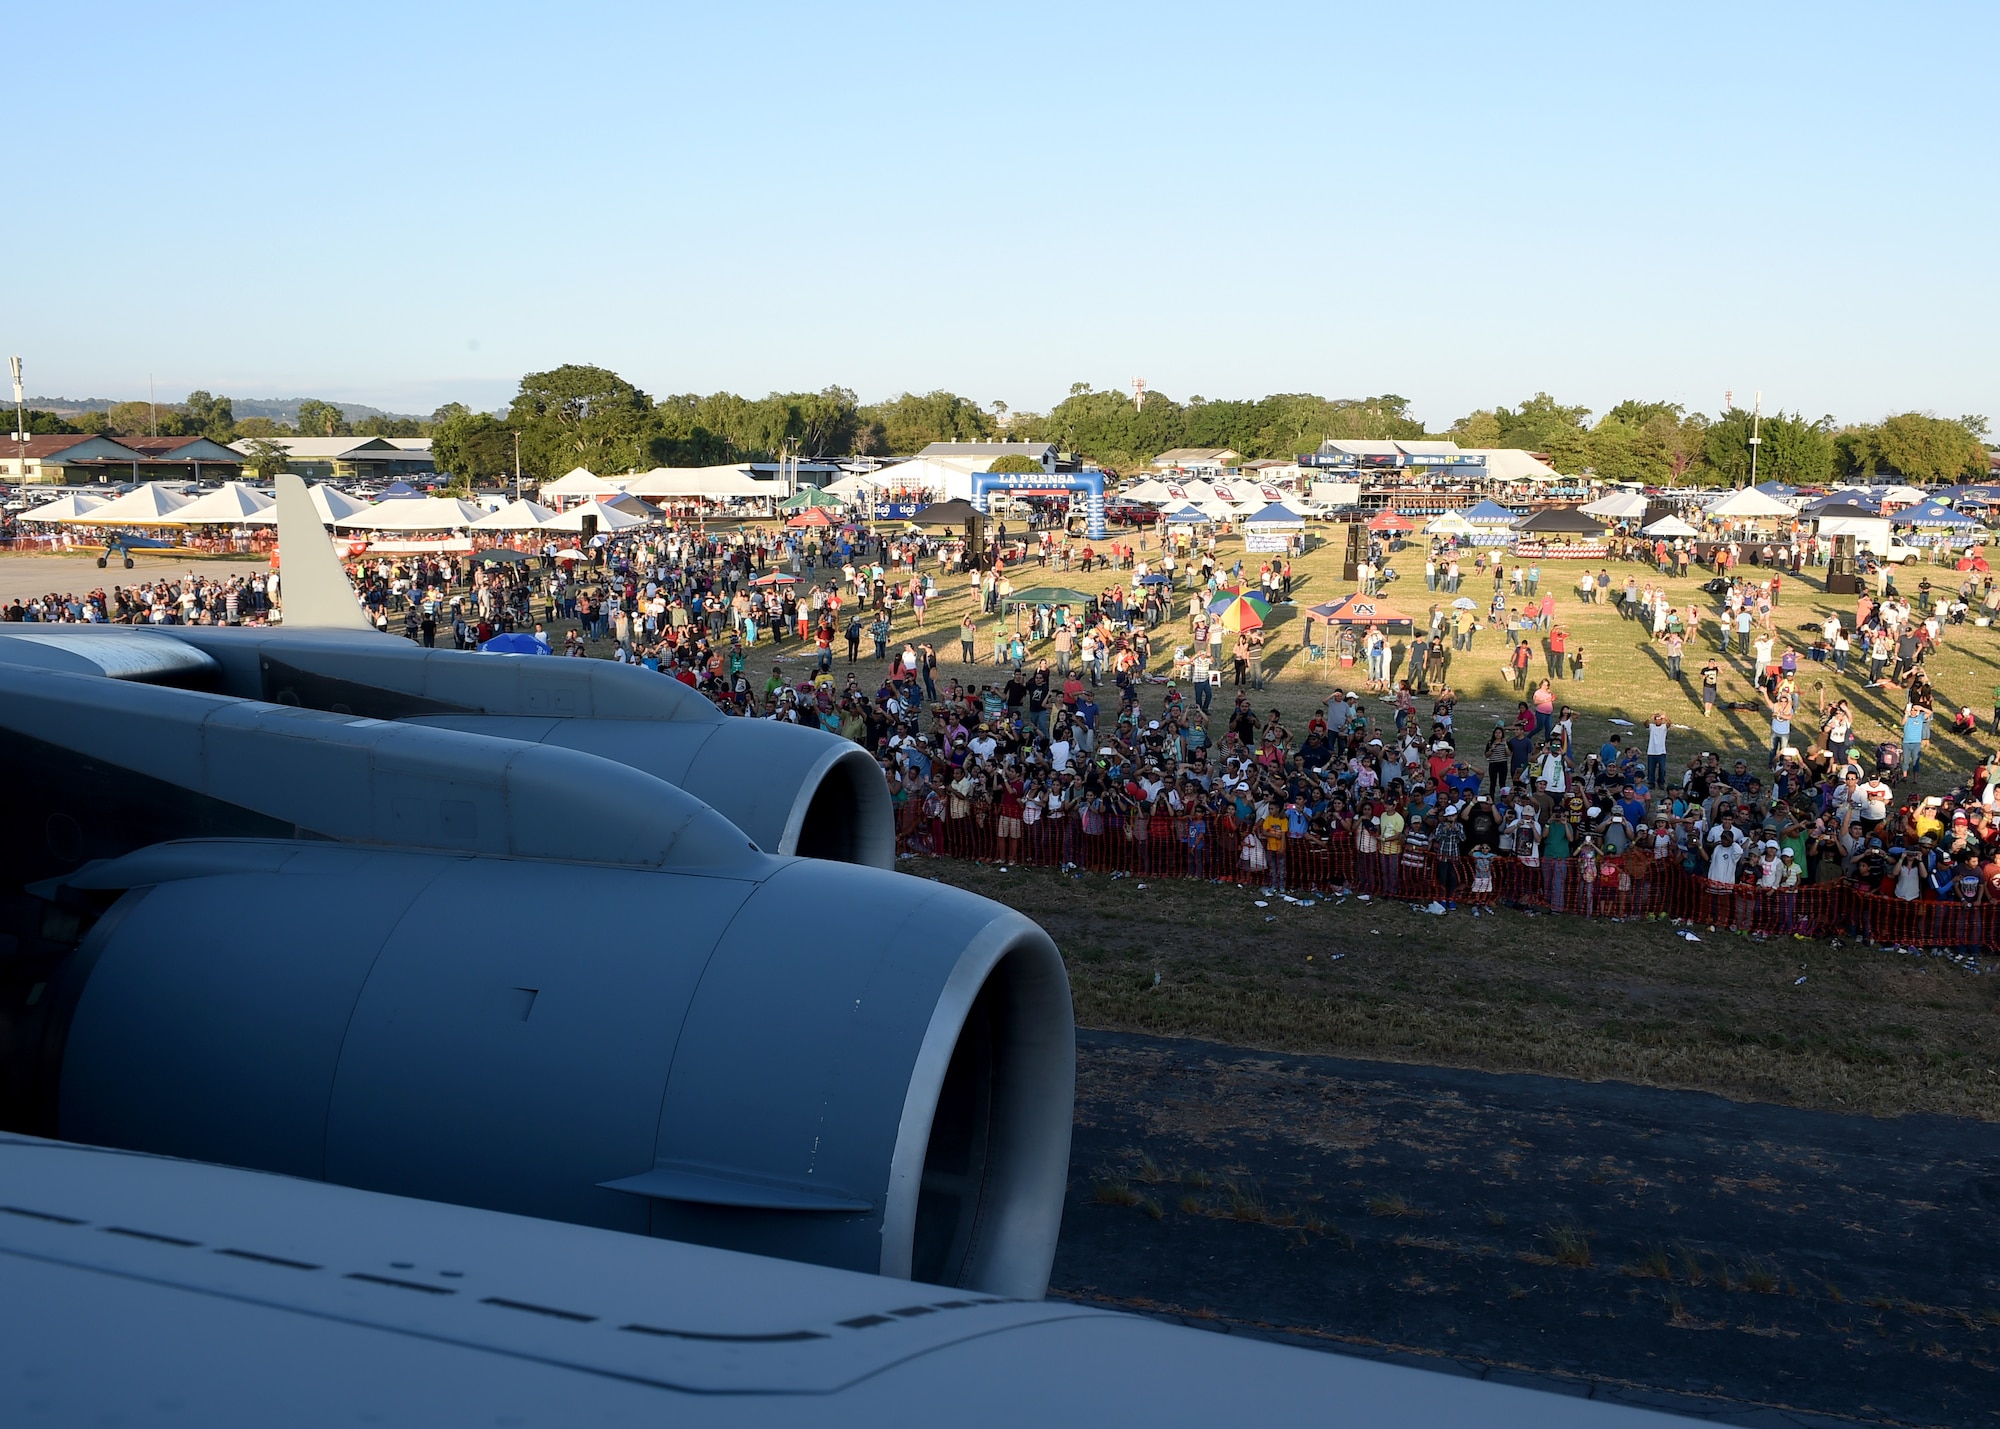 Citizens of El Salvador watch as a U.S. Air Force C-17 Globemaster III cargo aircraft, 58th Airlift Squadron is being taxied prior to takeoff at Ilopango International Airport in San Salvador, El Savador, Jan. 31, during the 2016 Ilopango Airshow. The C-17 was sent from Altus Air Force Base, Okla., to foster relationships between the U.S. and El Salvador. The aircraft was setup as a static display for the attendees to view and learn about some of its capabilities. (U.S. Air Force photo by Senior Airman Franklin R. Ramos/Released)